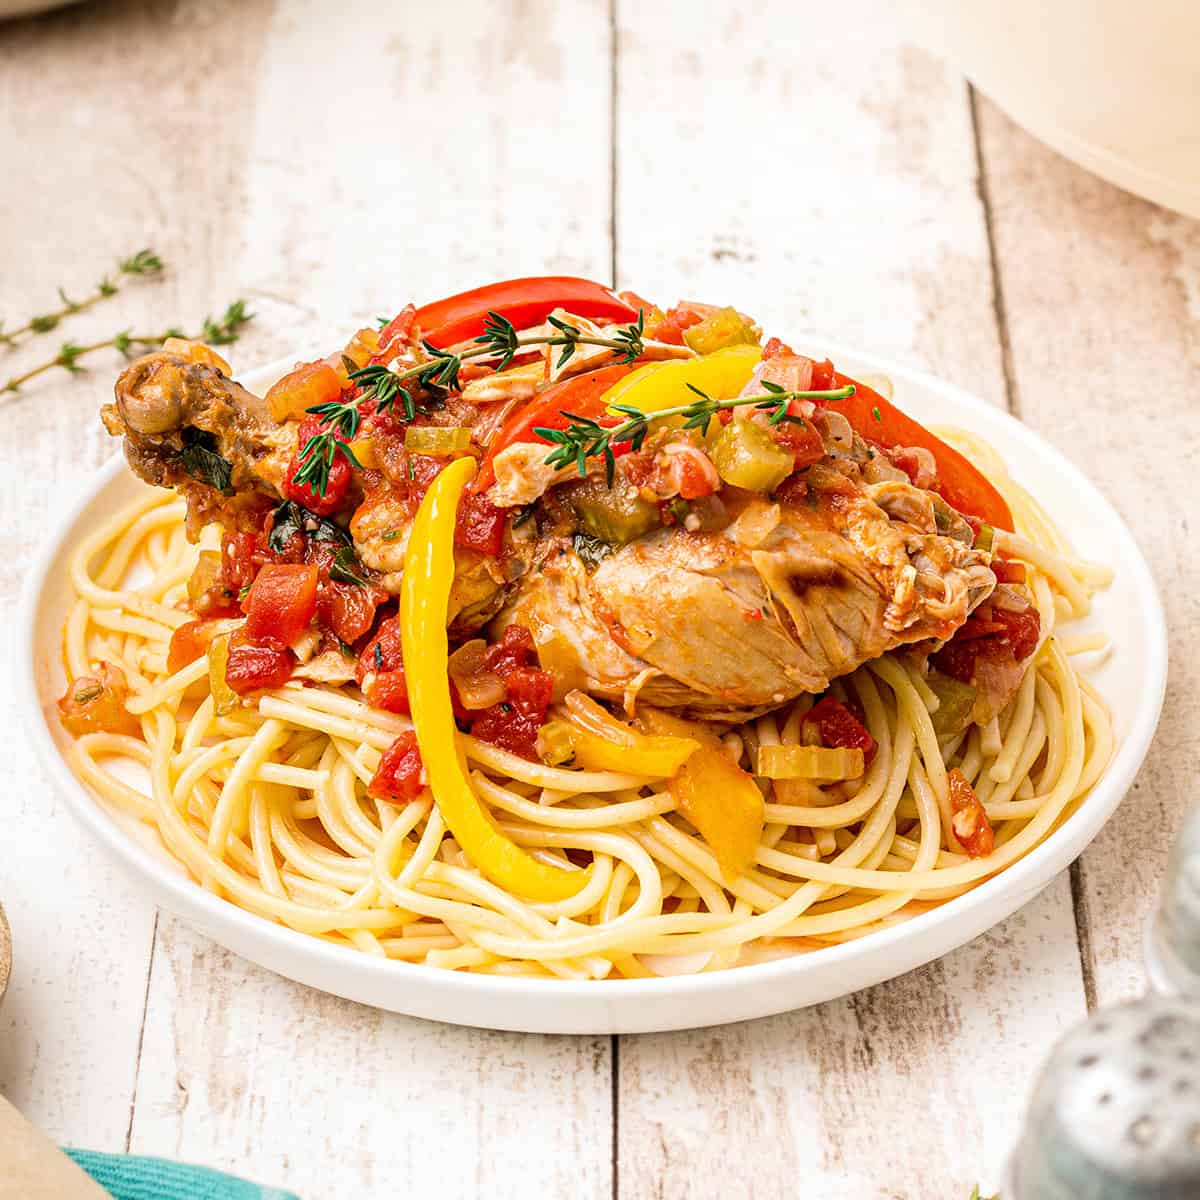 Dutch Oven Chicken Cacciatore over pasta in a white serving bowl on a rustic wooden background.